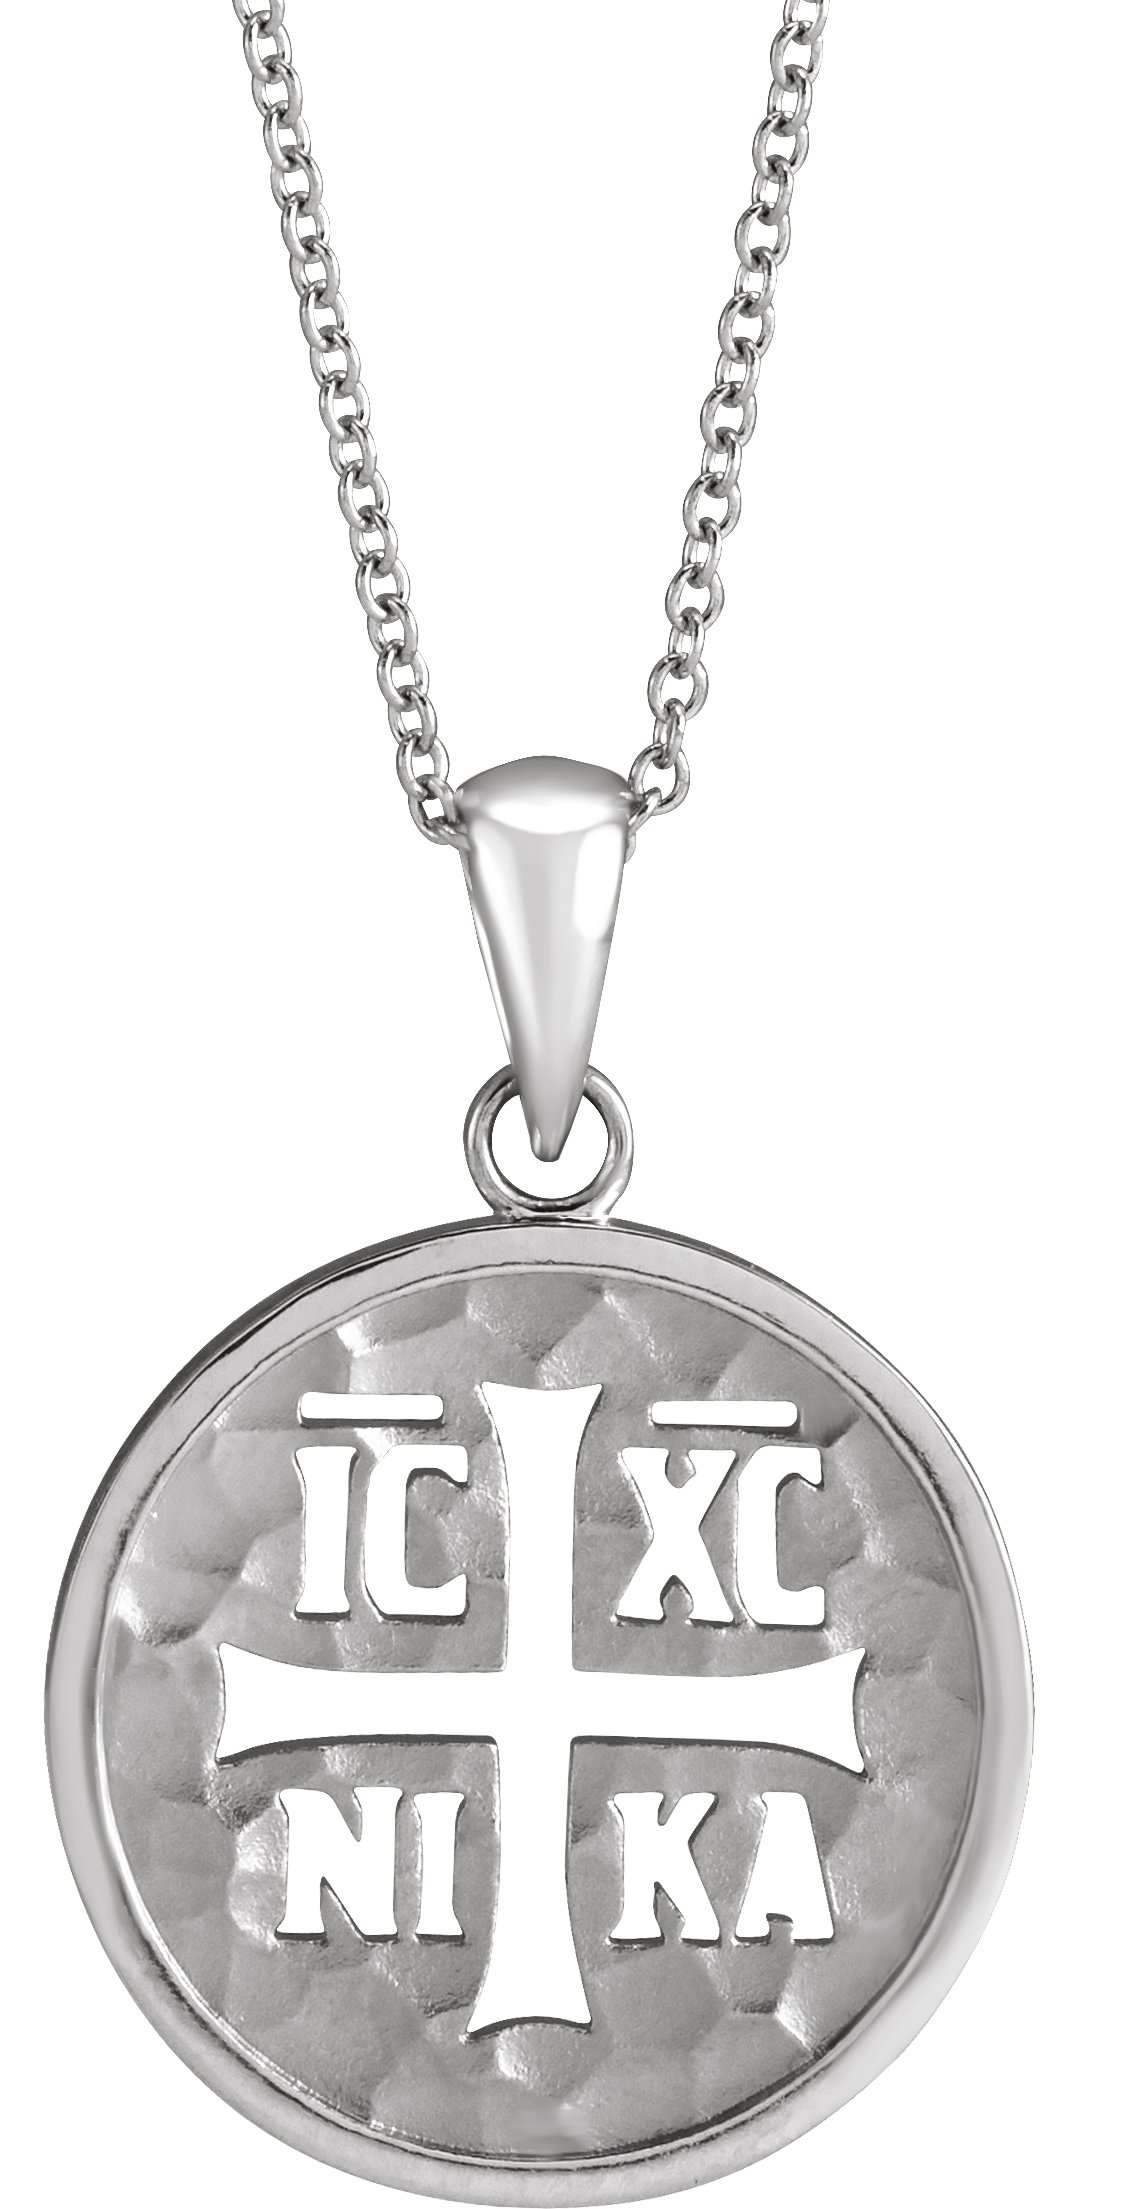 Sterling Silver Orthodox IC XC NIKA Medallion 16-18" Necklace